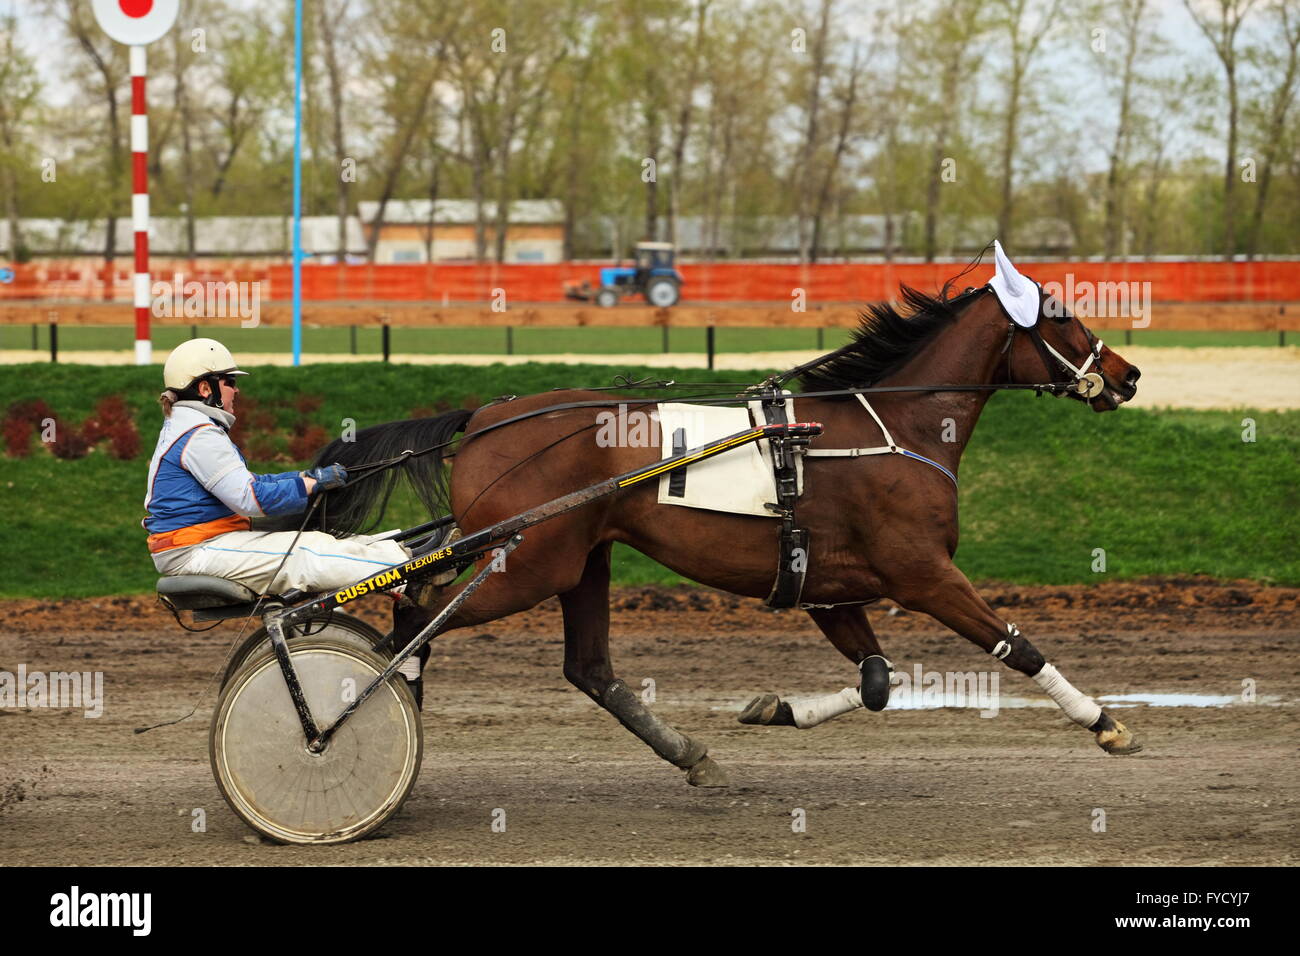 Standardbred is an American horse breed trotter making a lap in the horse race Stock Photo